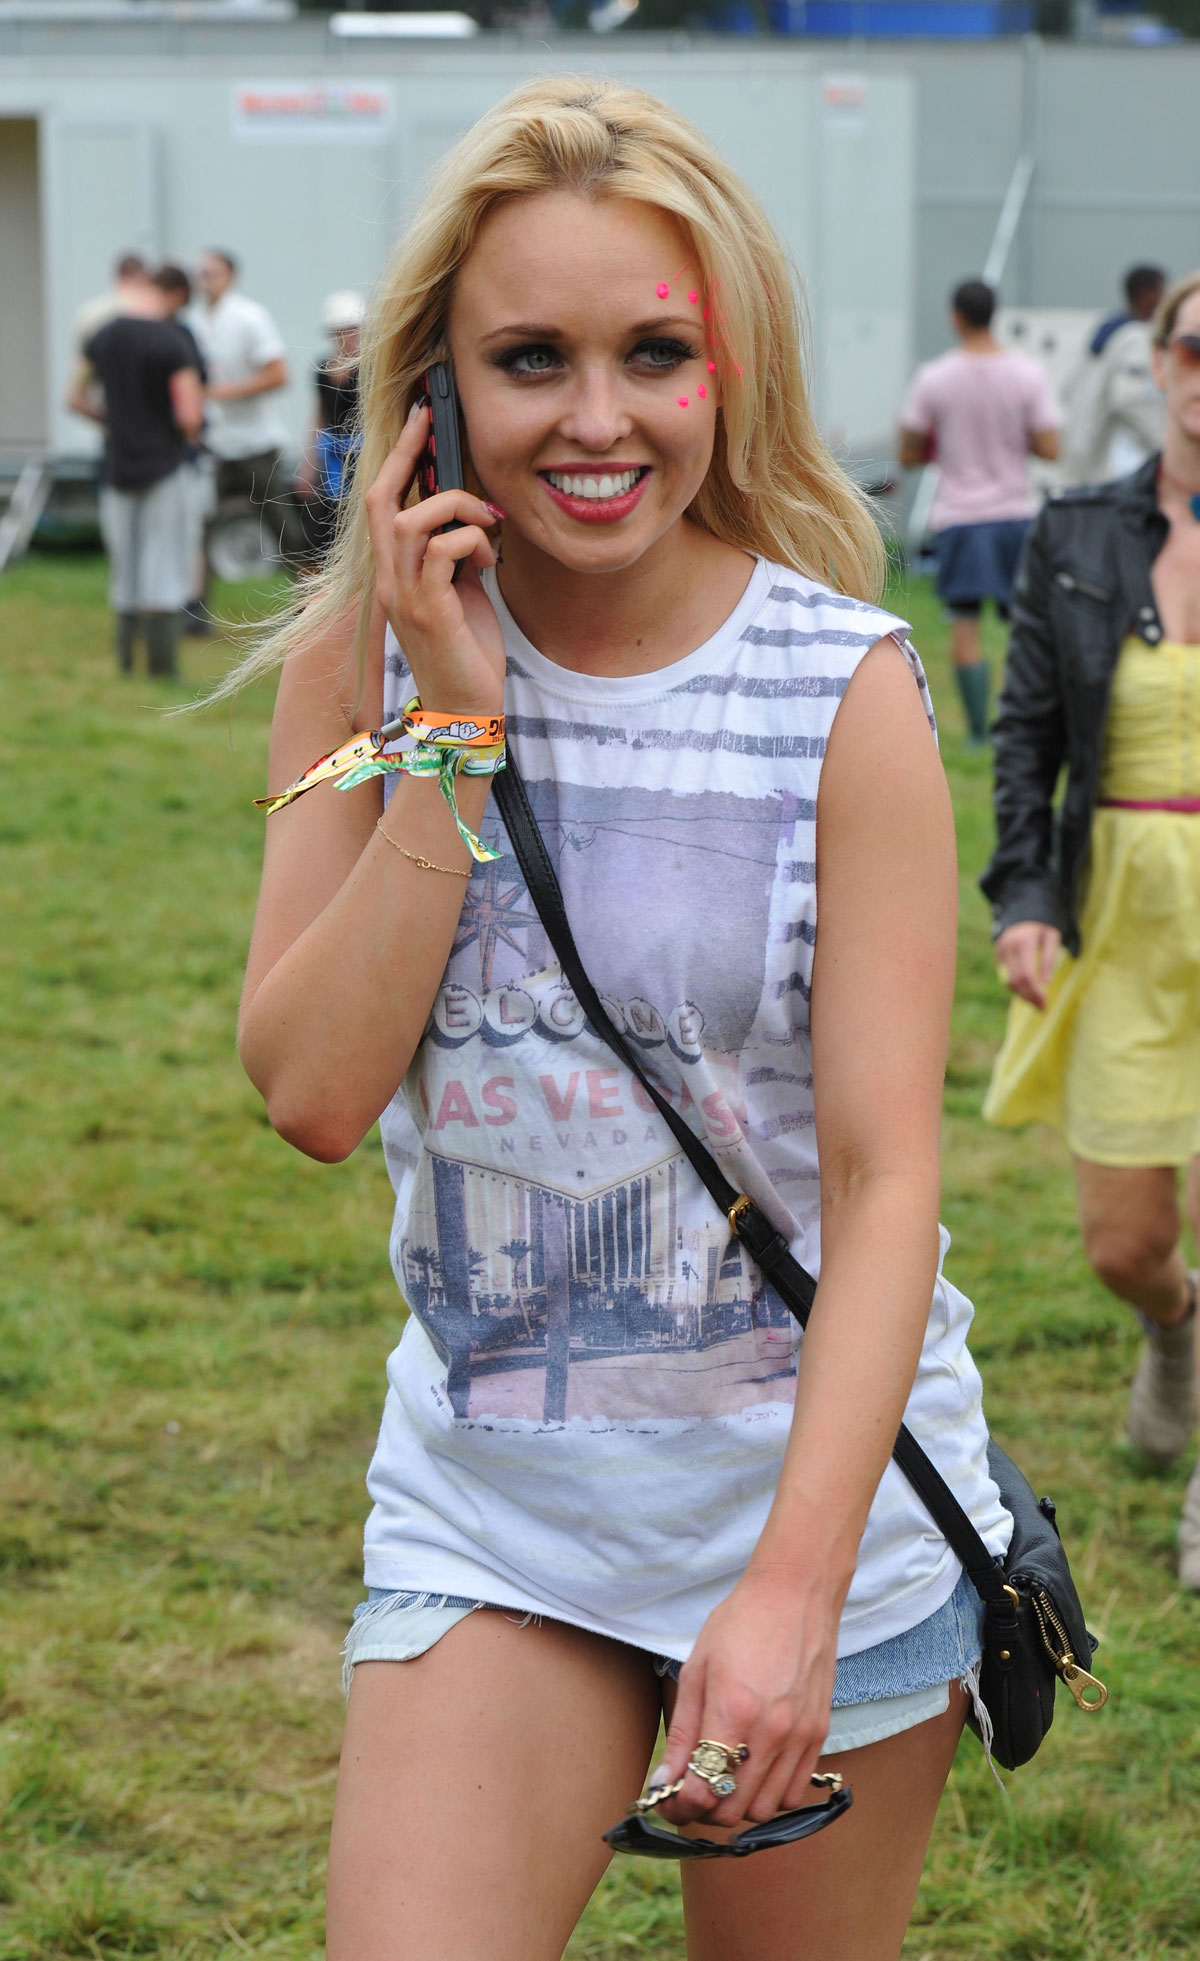 JORGIE PORTER and HOLLY WESTON at the V Festival in Staffordshire - HawtCelebs